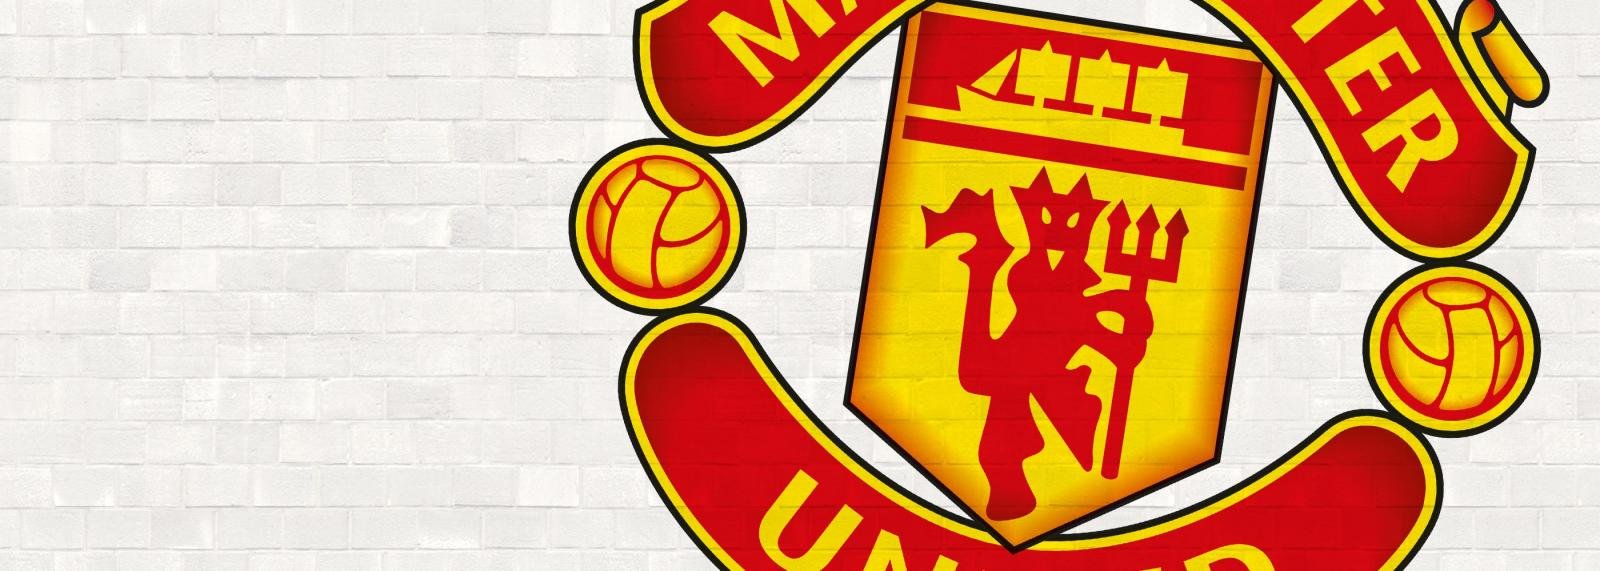 Manchester United plotting summer raid for 18-year-old Arsenal target and Santos starlet